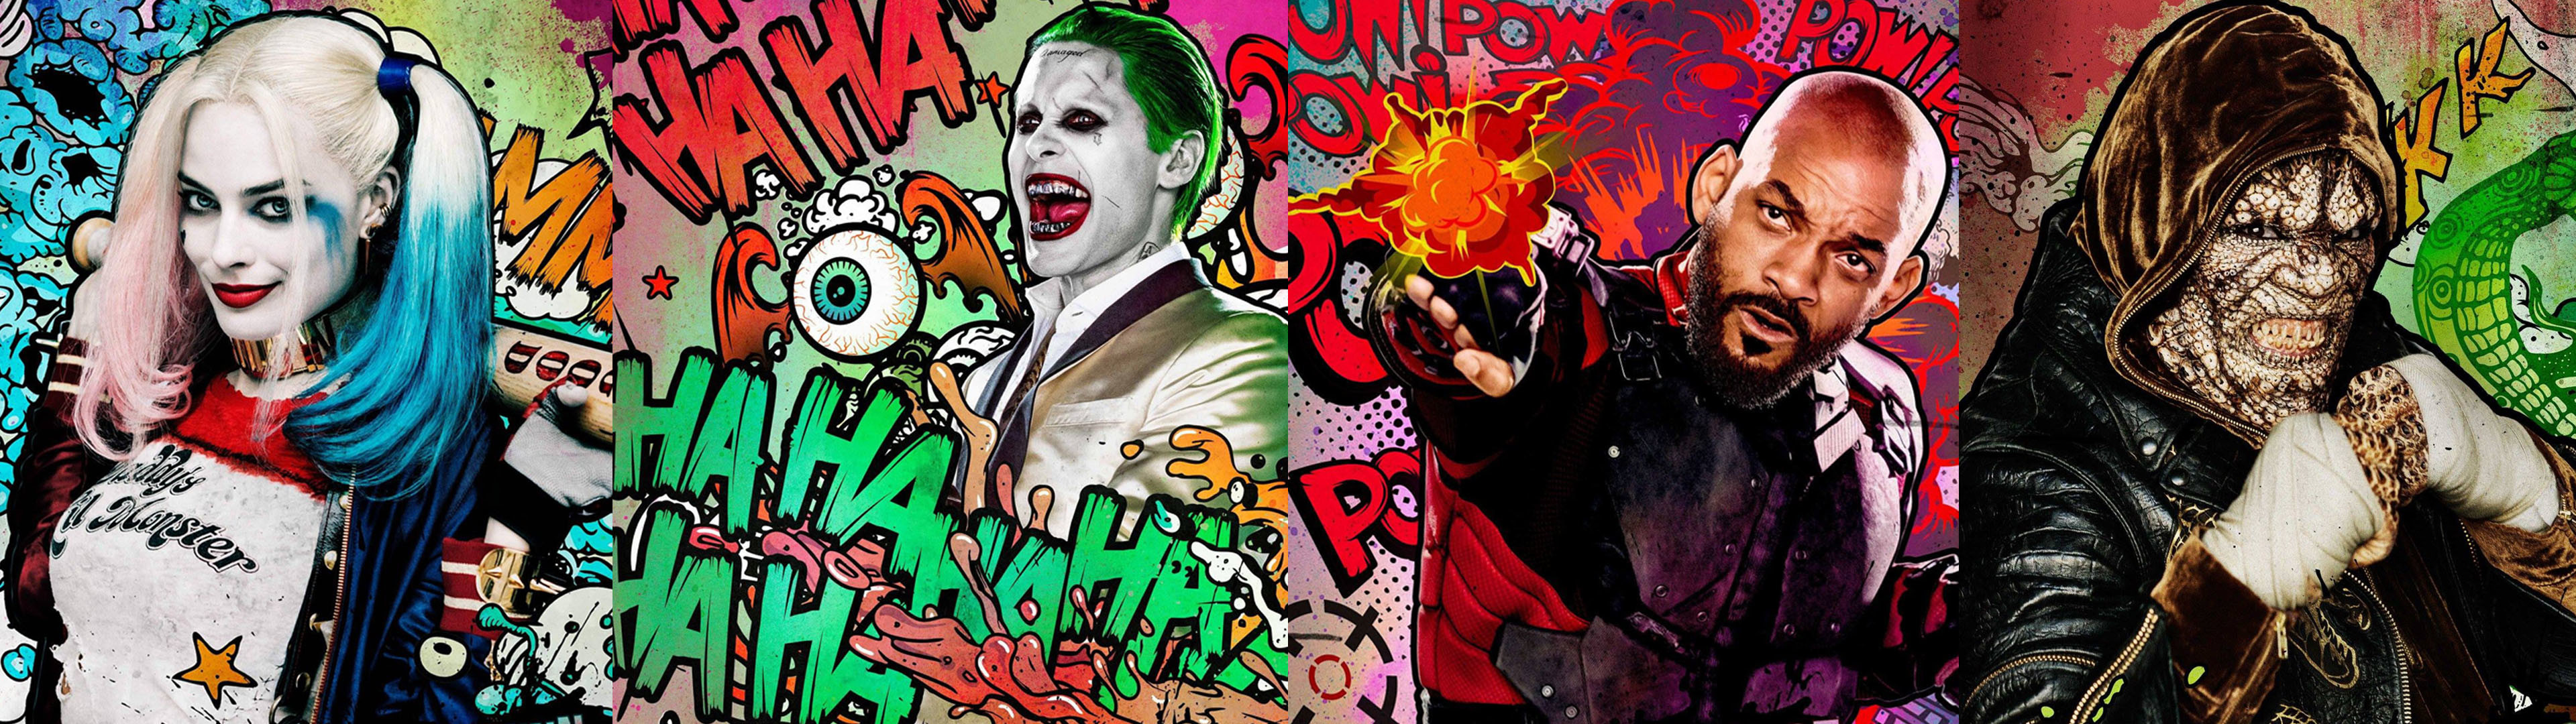 3840x1080 Suicide Squad / BvS dual monitor wallpapers